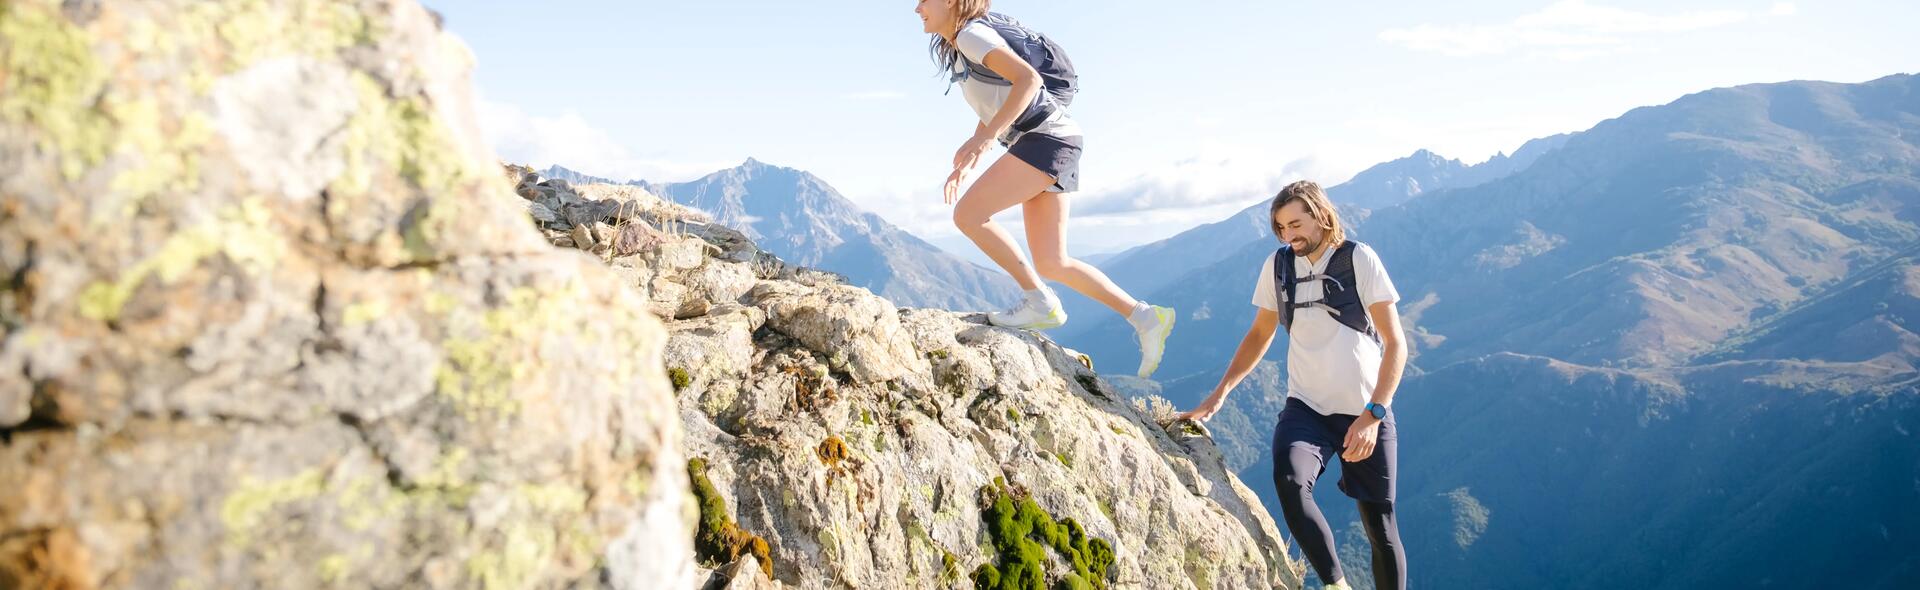 Speed hiking tips, Fast-paced hiking